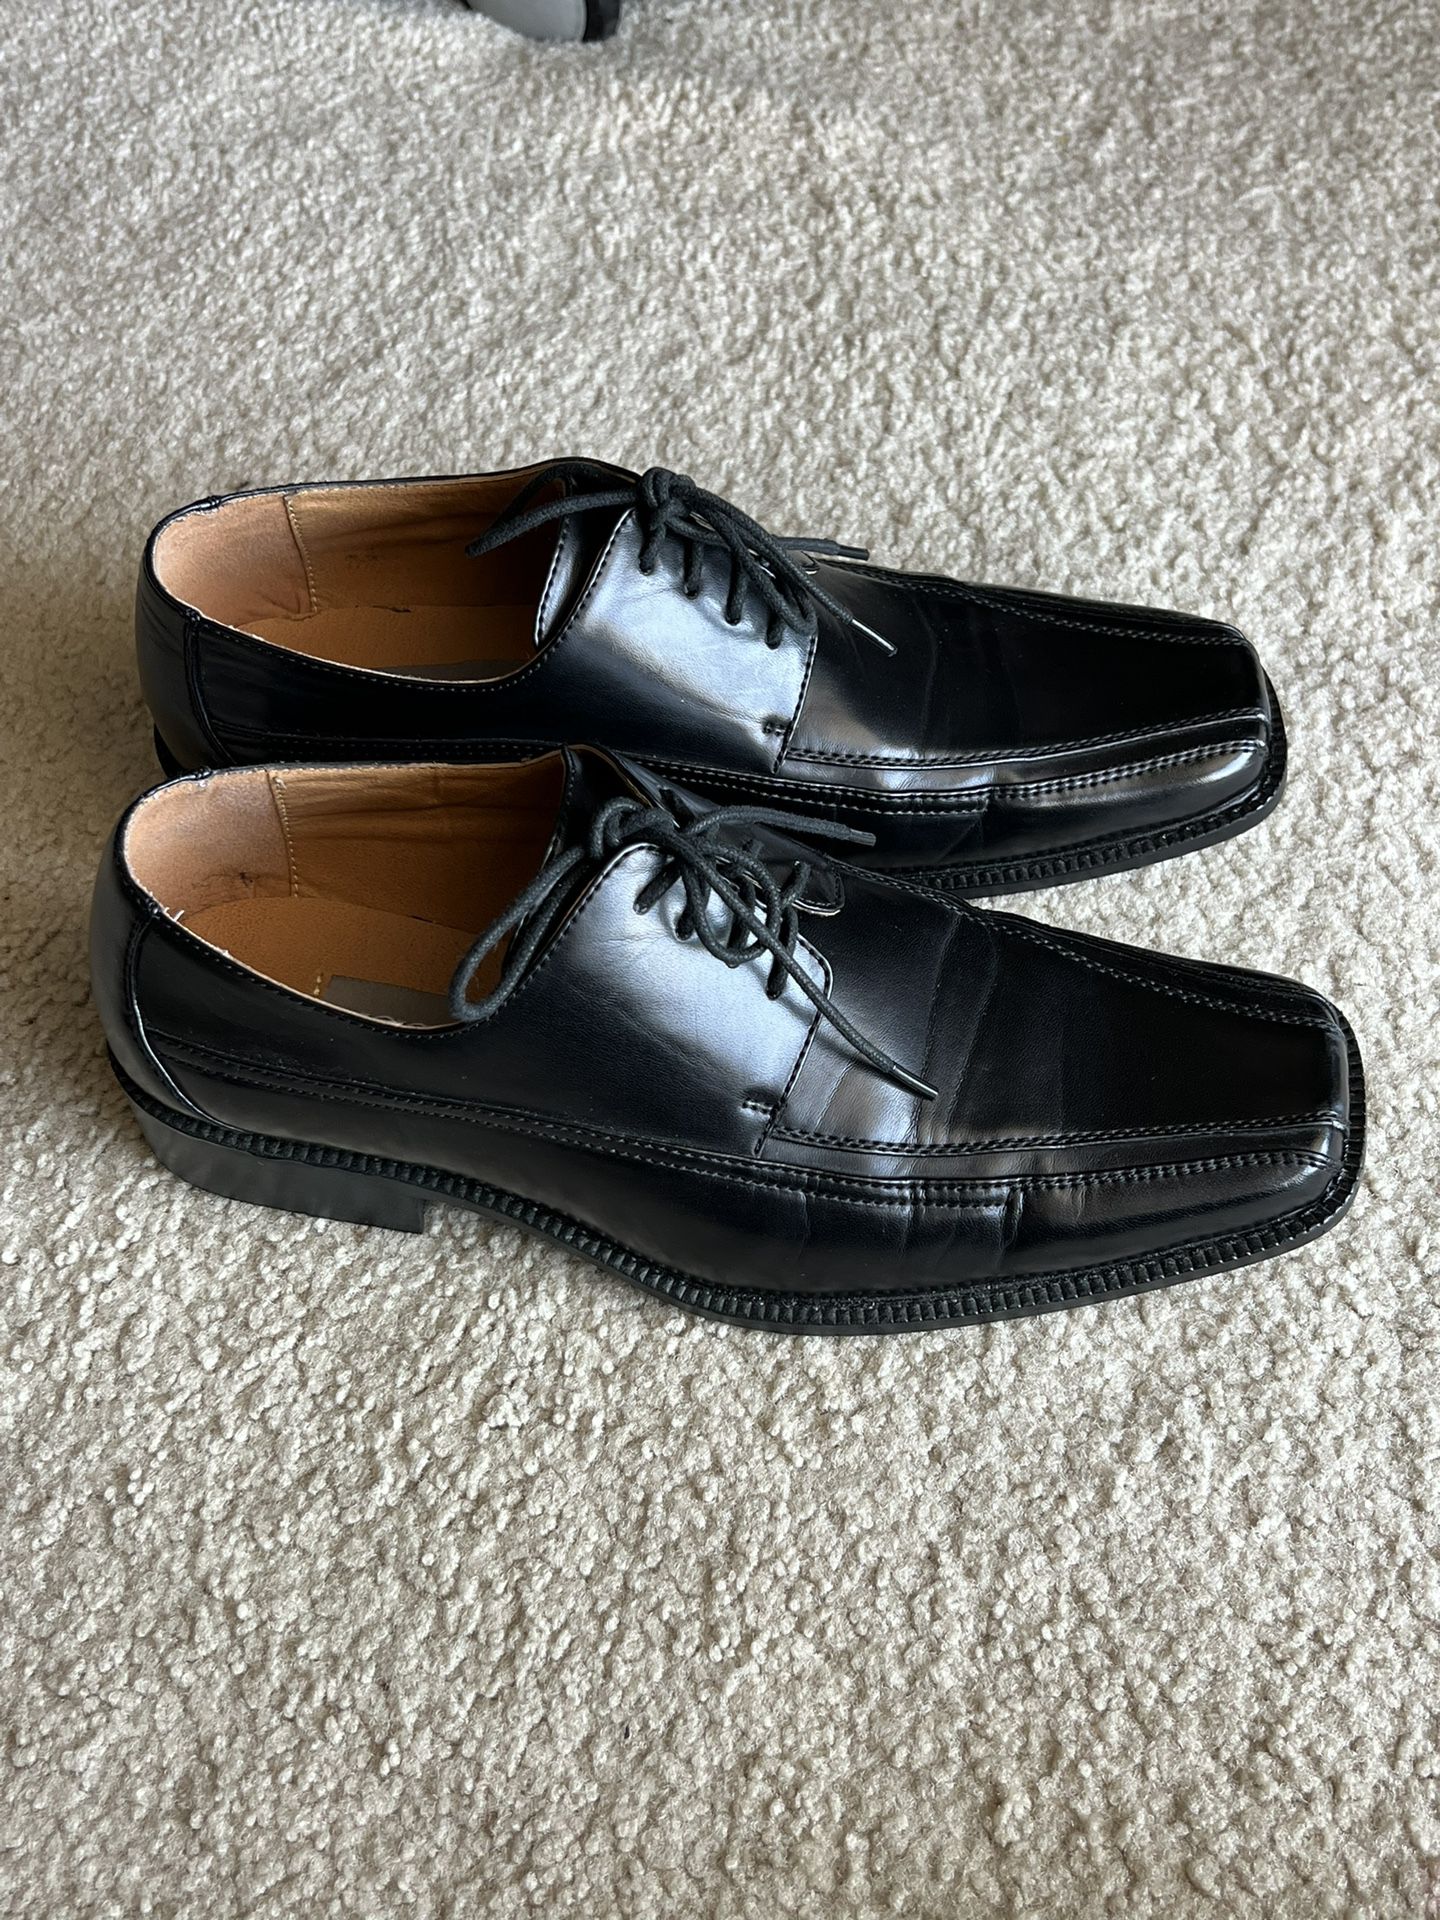 DRESS MENS SHOES SIZE 9.5 JUST LIKE NEW FOR SALE 